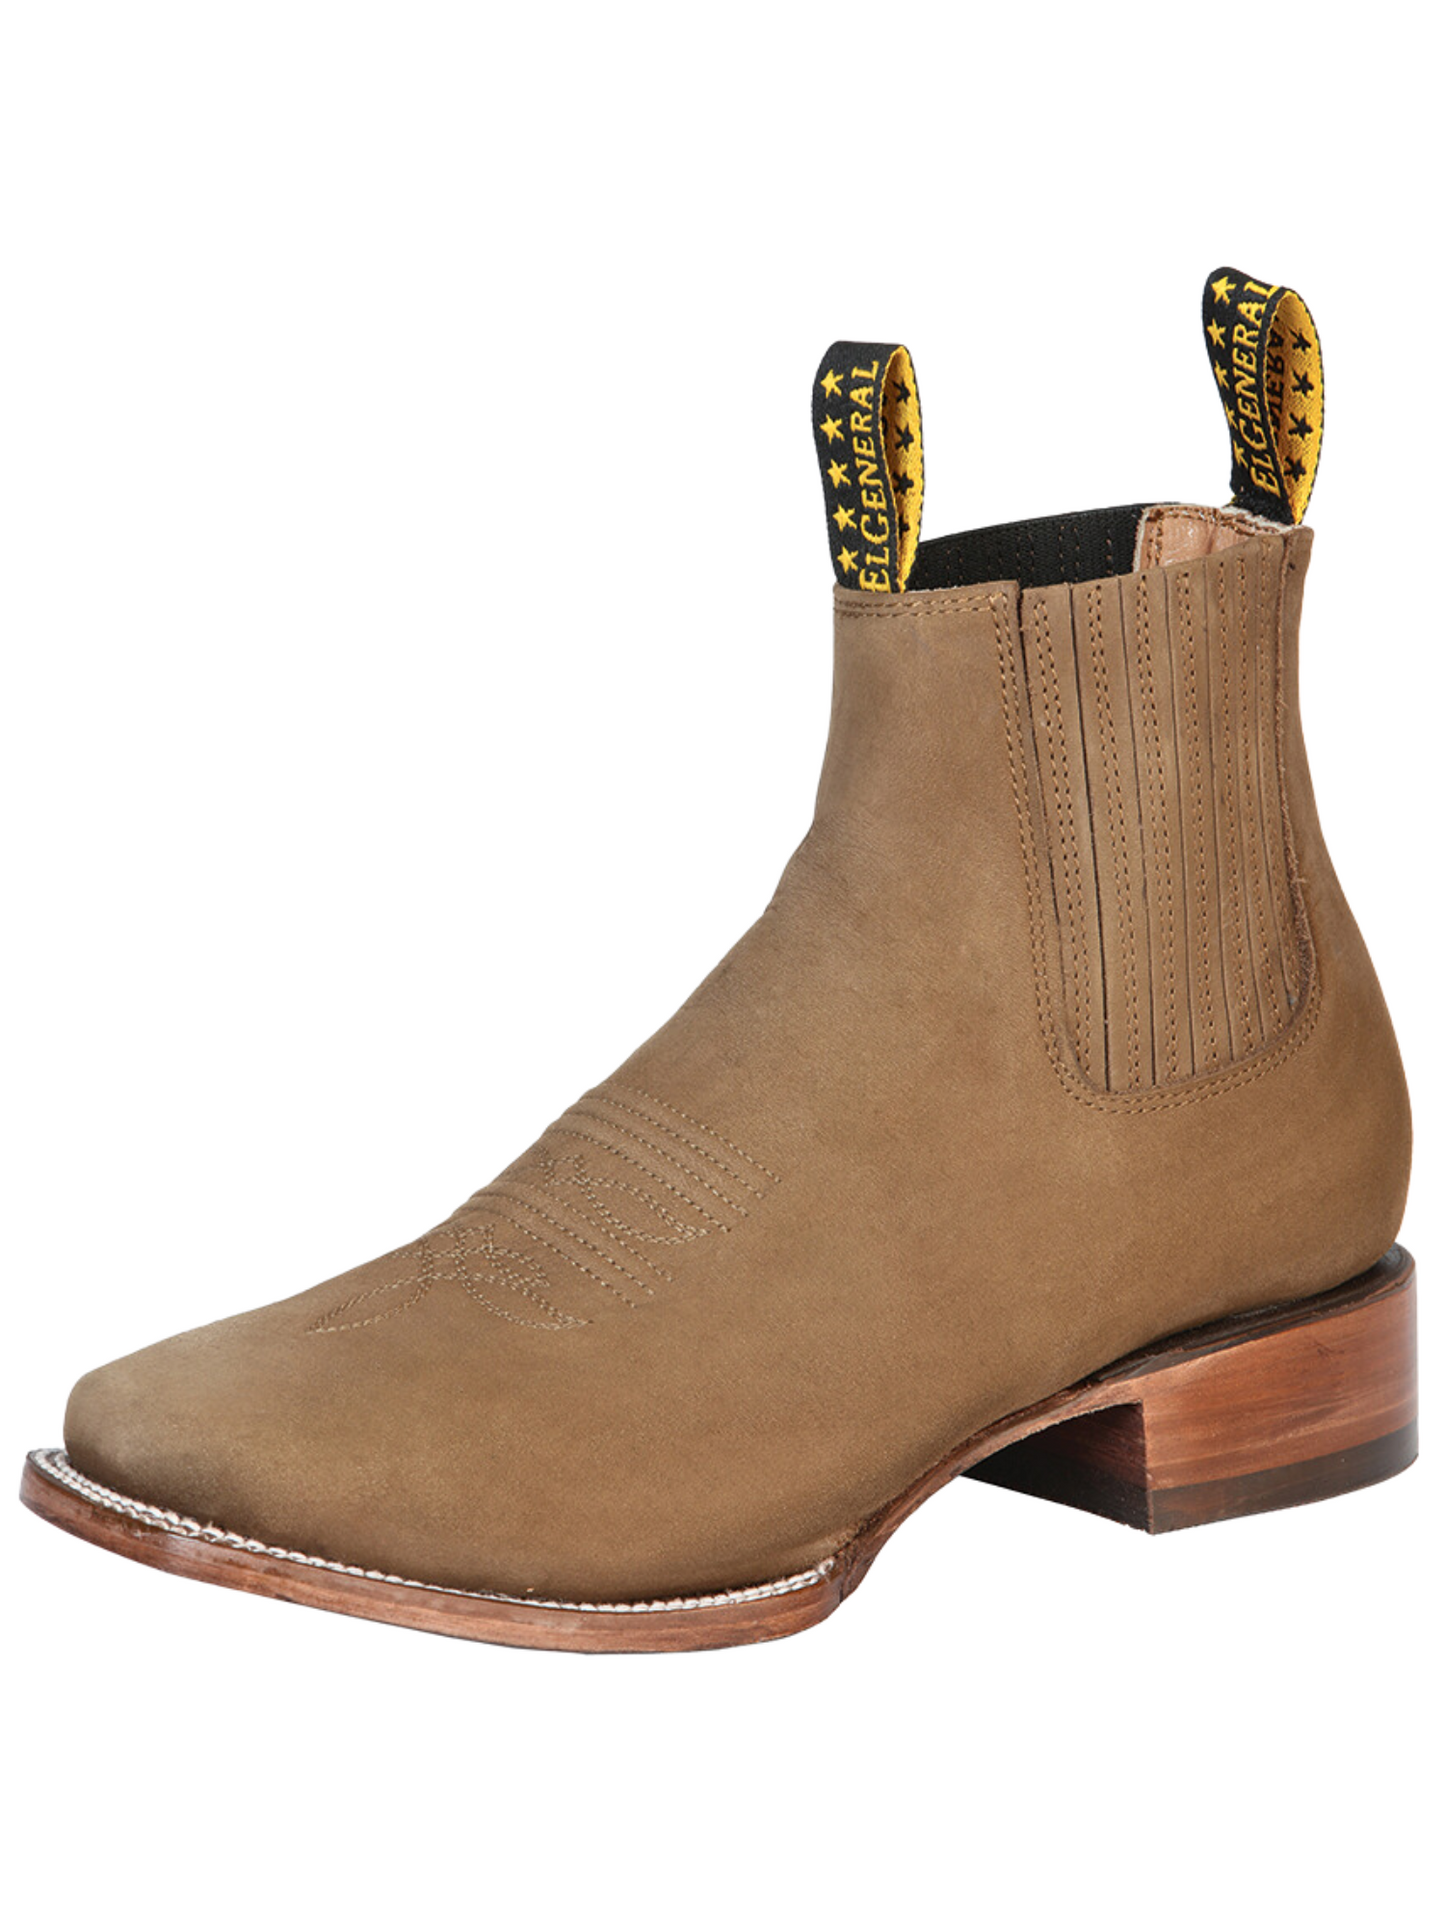 Classic Nubuck Leather Rodeo Cowboy Ankle Boots for Men 'El General' - ID: 126189 Western Ankle Boots El General Cafe